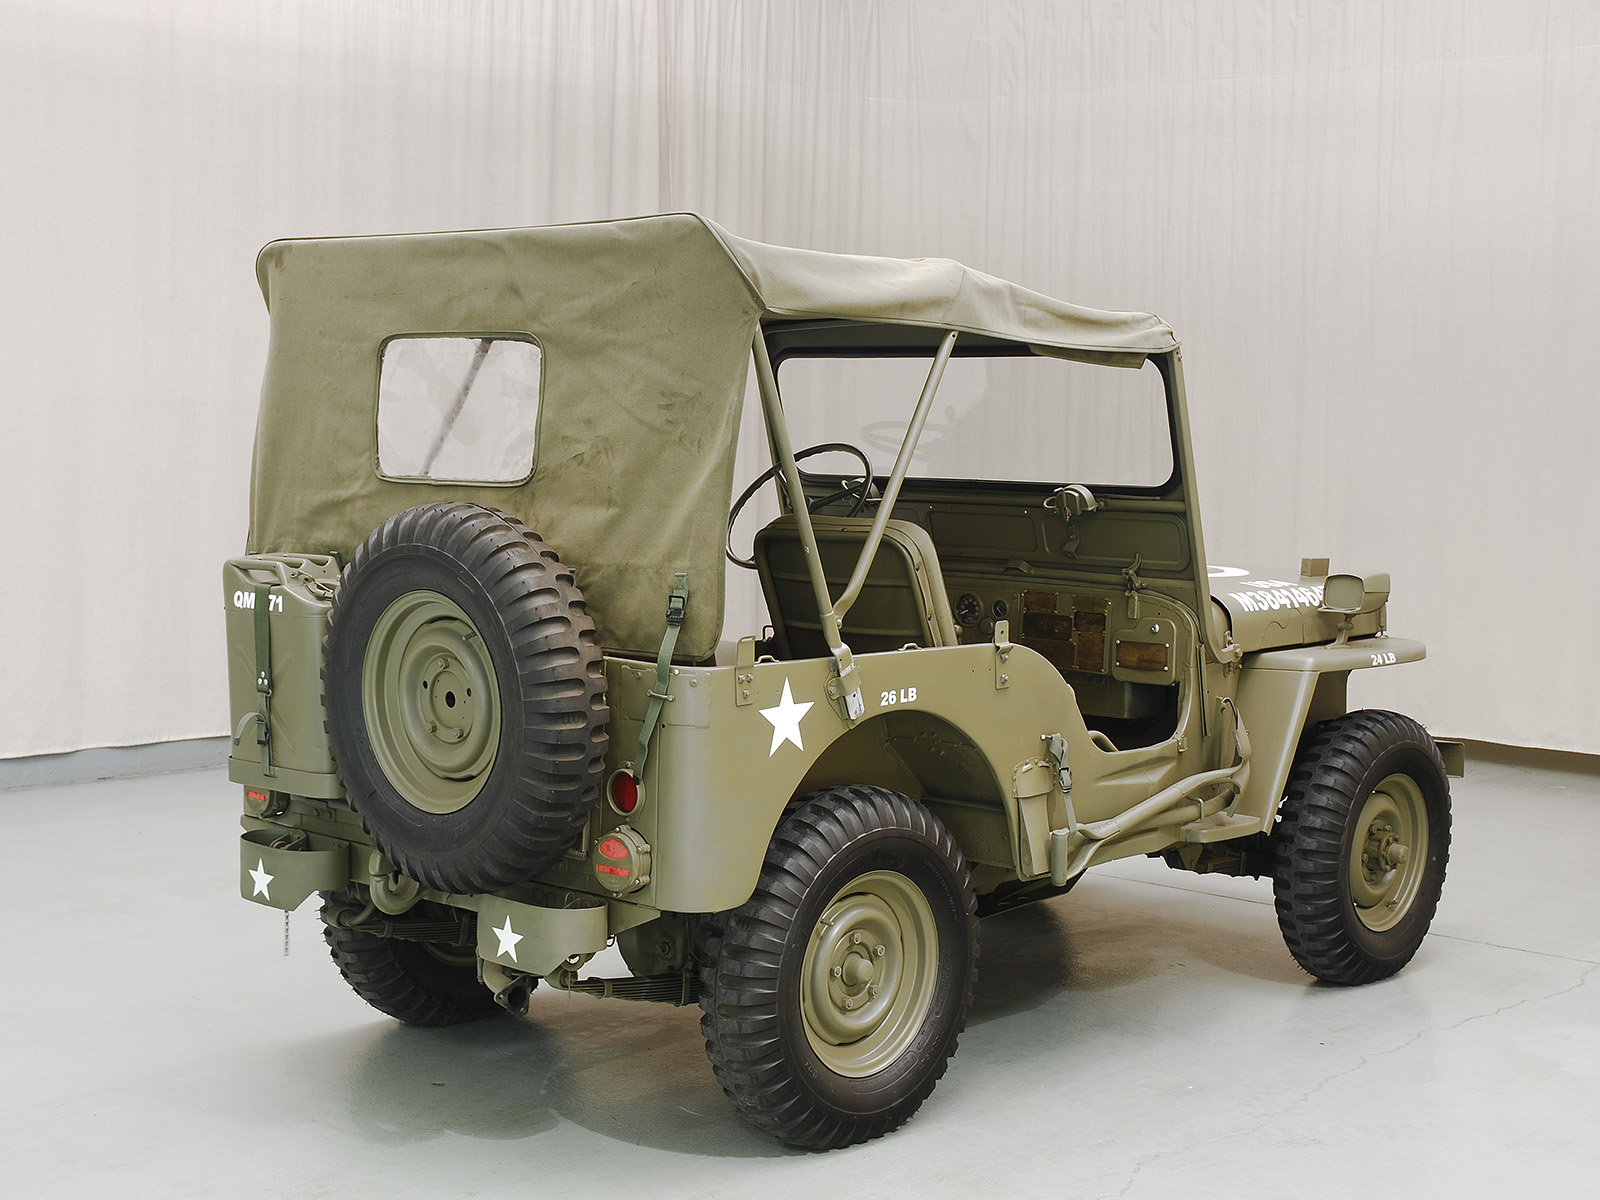 1949 willys-overland m38 1/4 ton